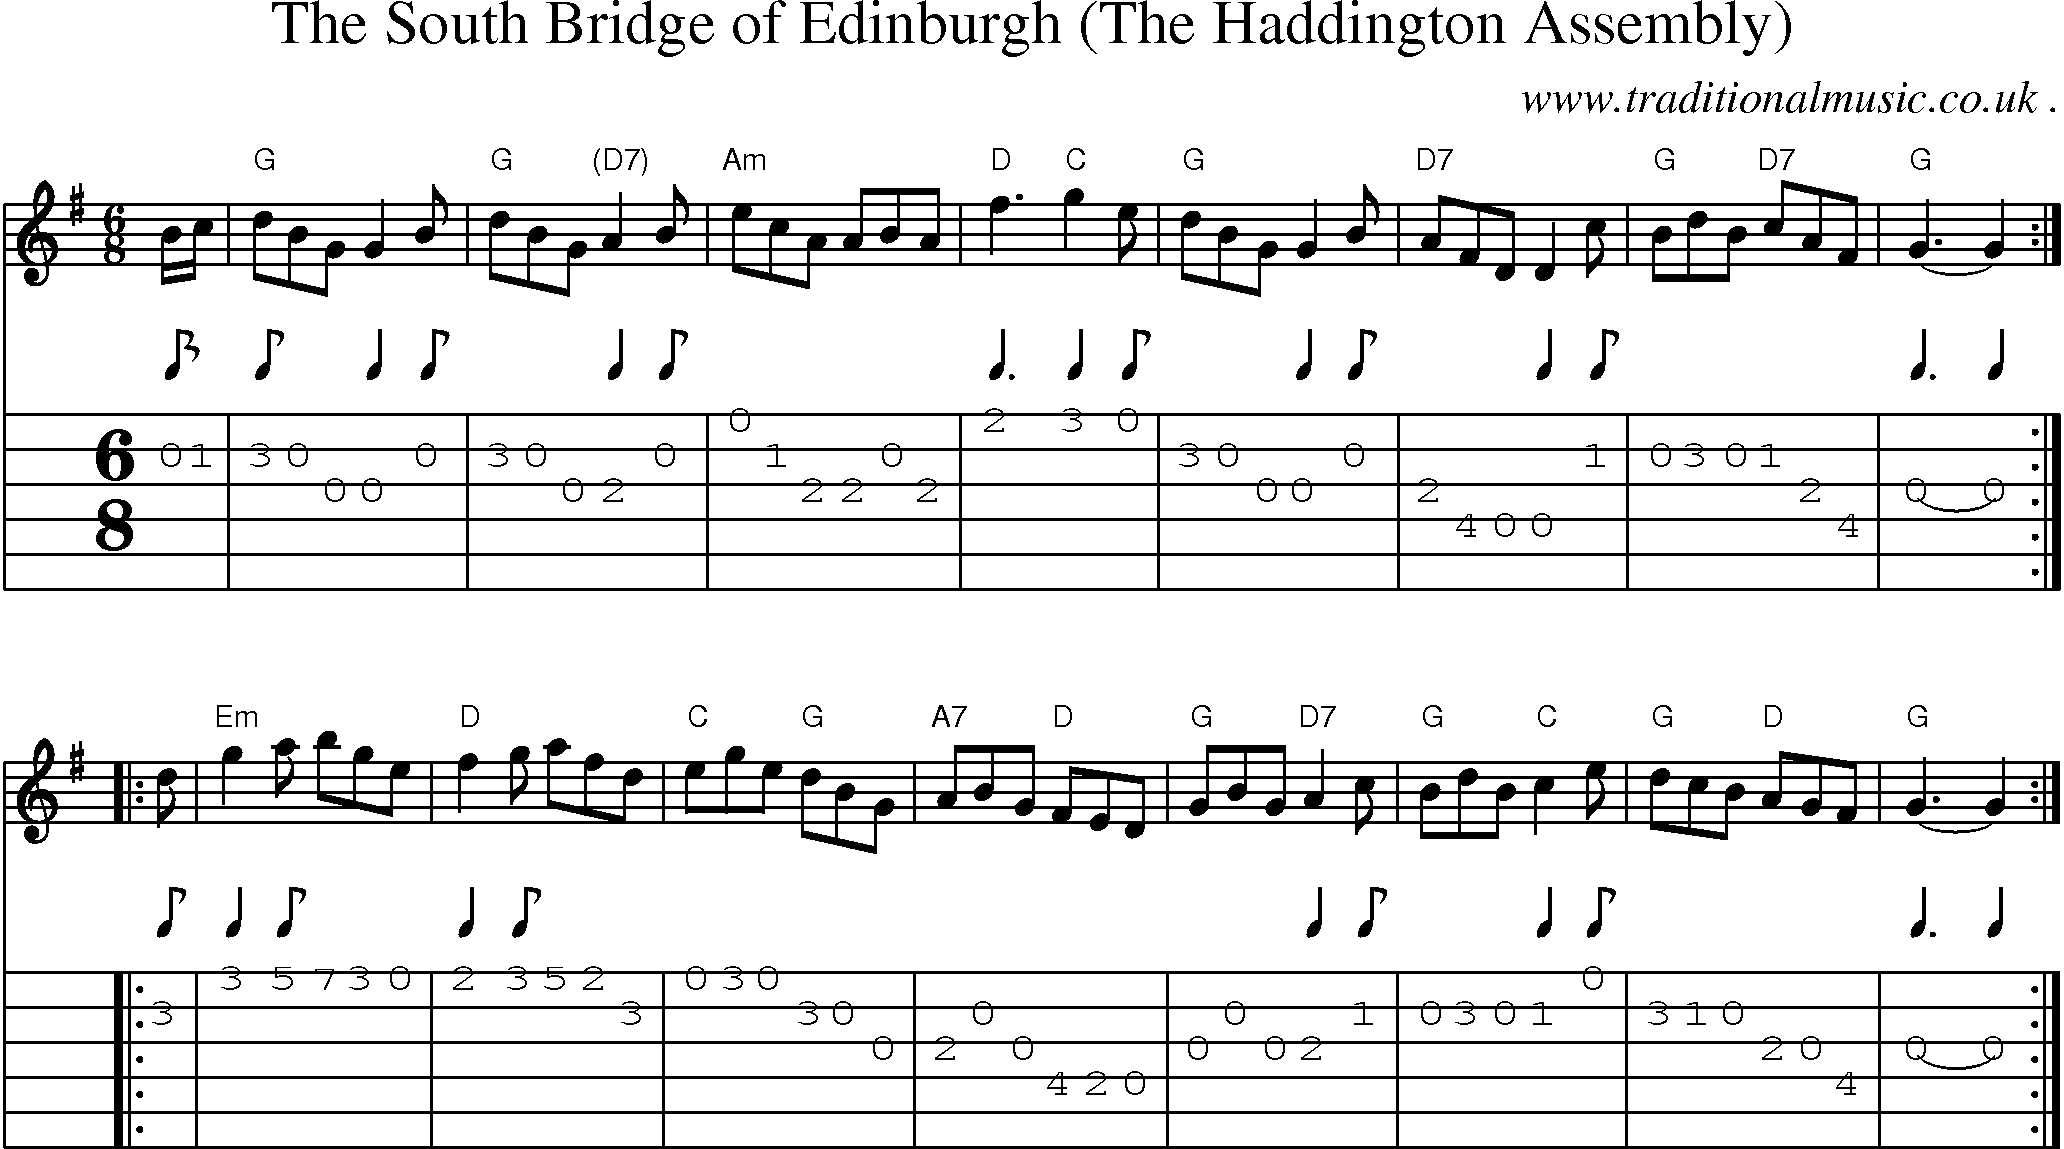 Sheet-music  score, Chords and Guitar Tabs for The South Bridge Of Edinburgh The Haddington Assembly